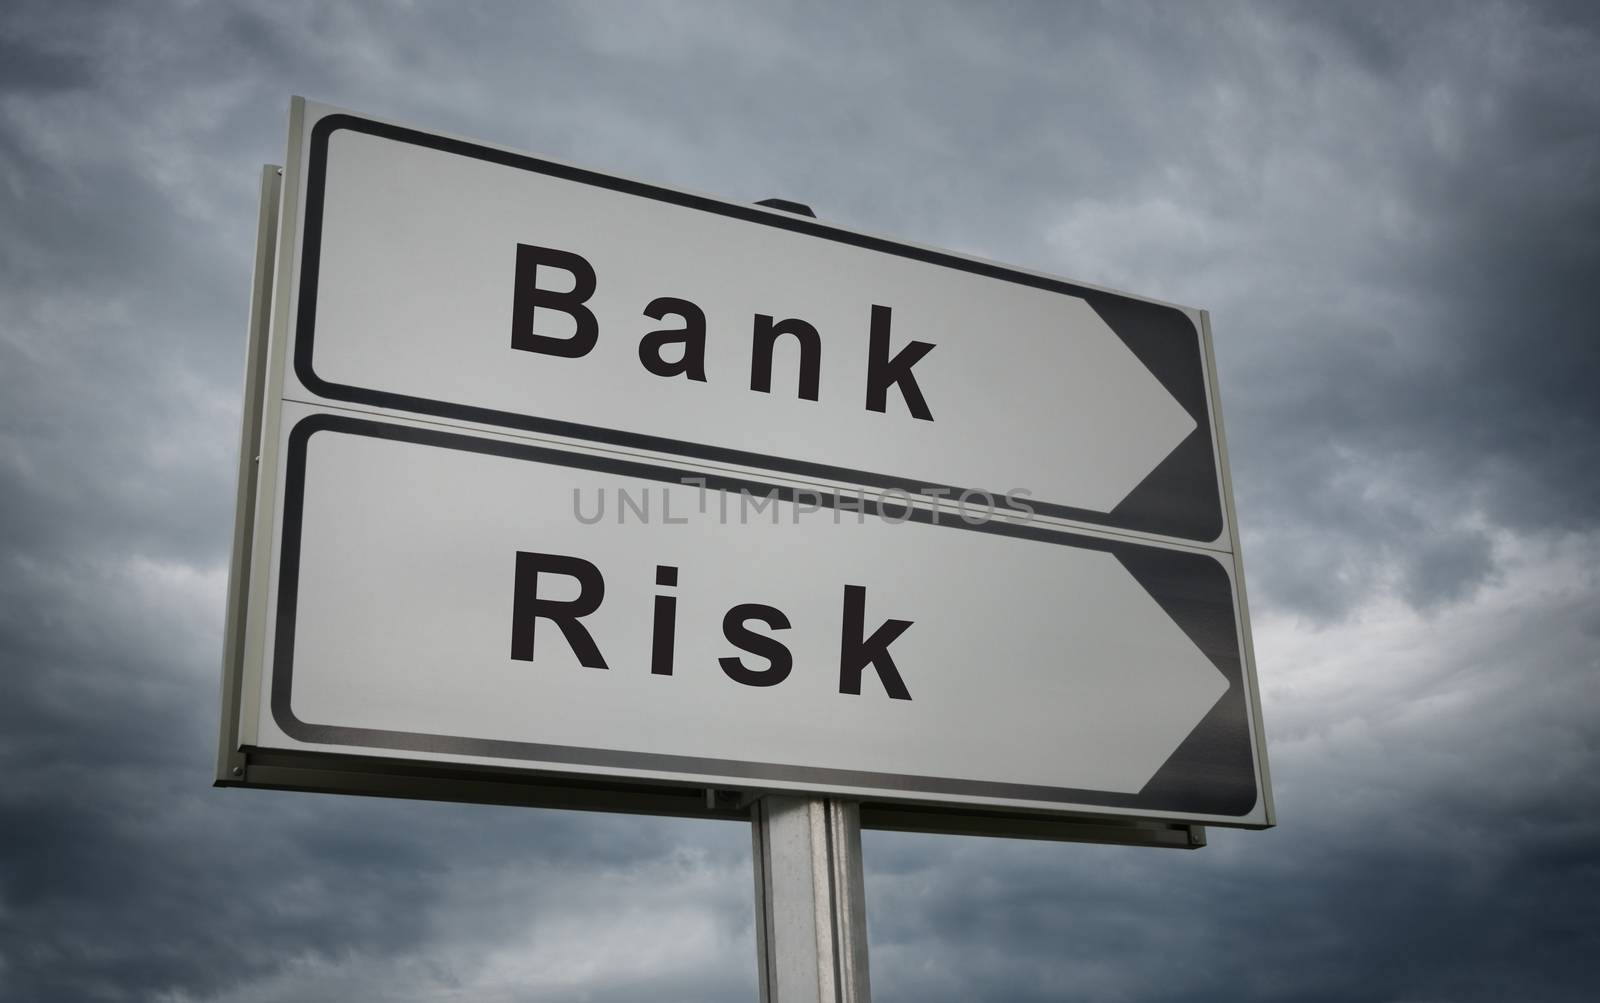 Bank Risk road sign. by BPhoto